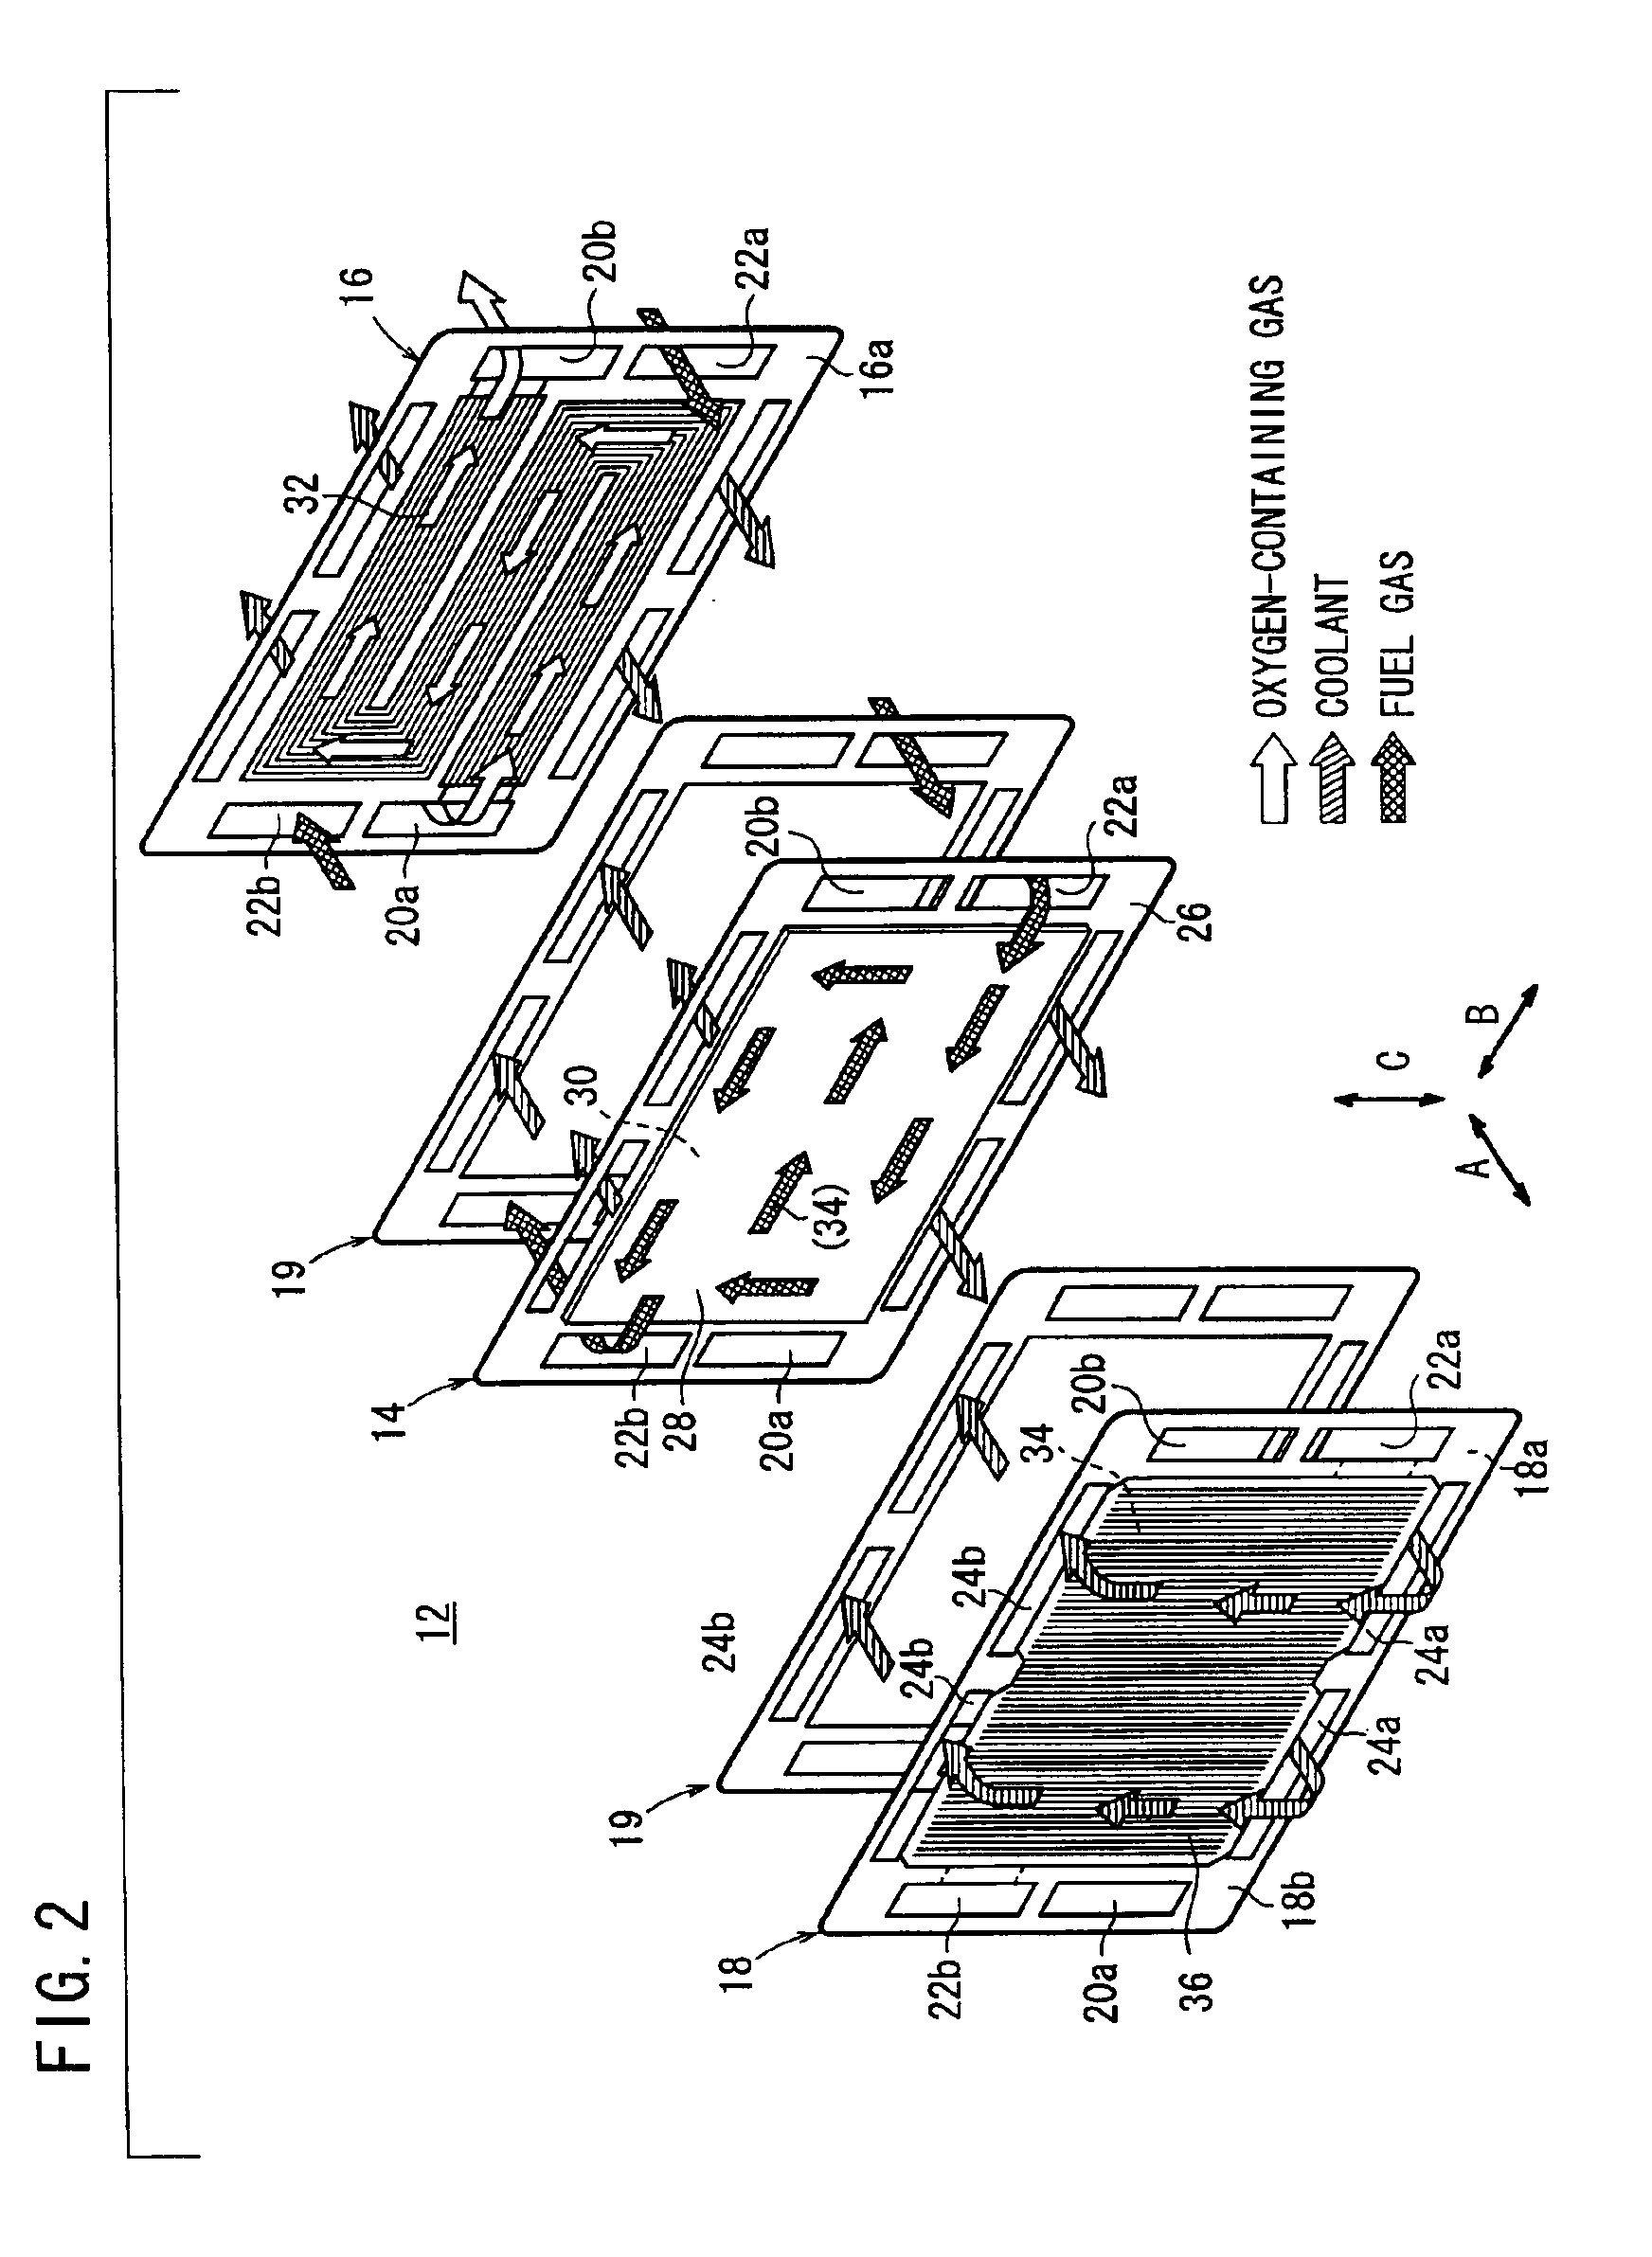 Apparatus for measuring current density of fuel cell